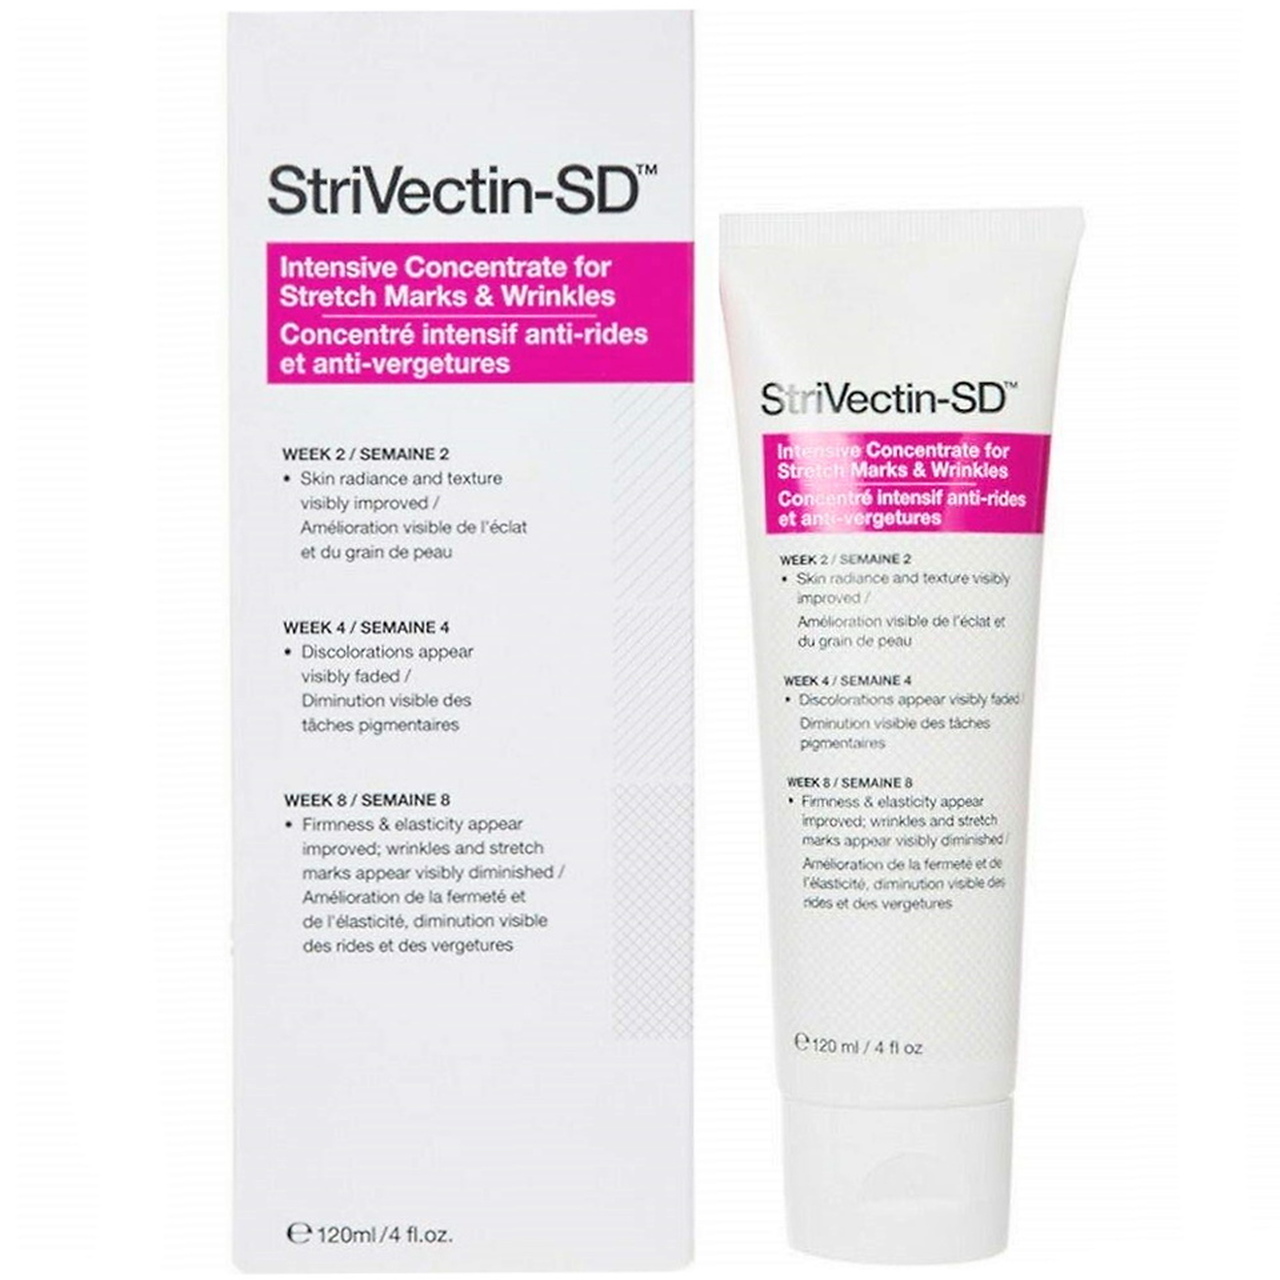 StriVectin-SD Intensive Concentrate for Stretch Marks and Wrinkles 4oz